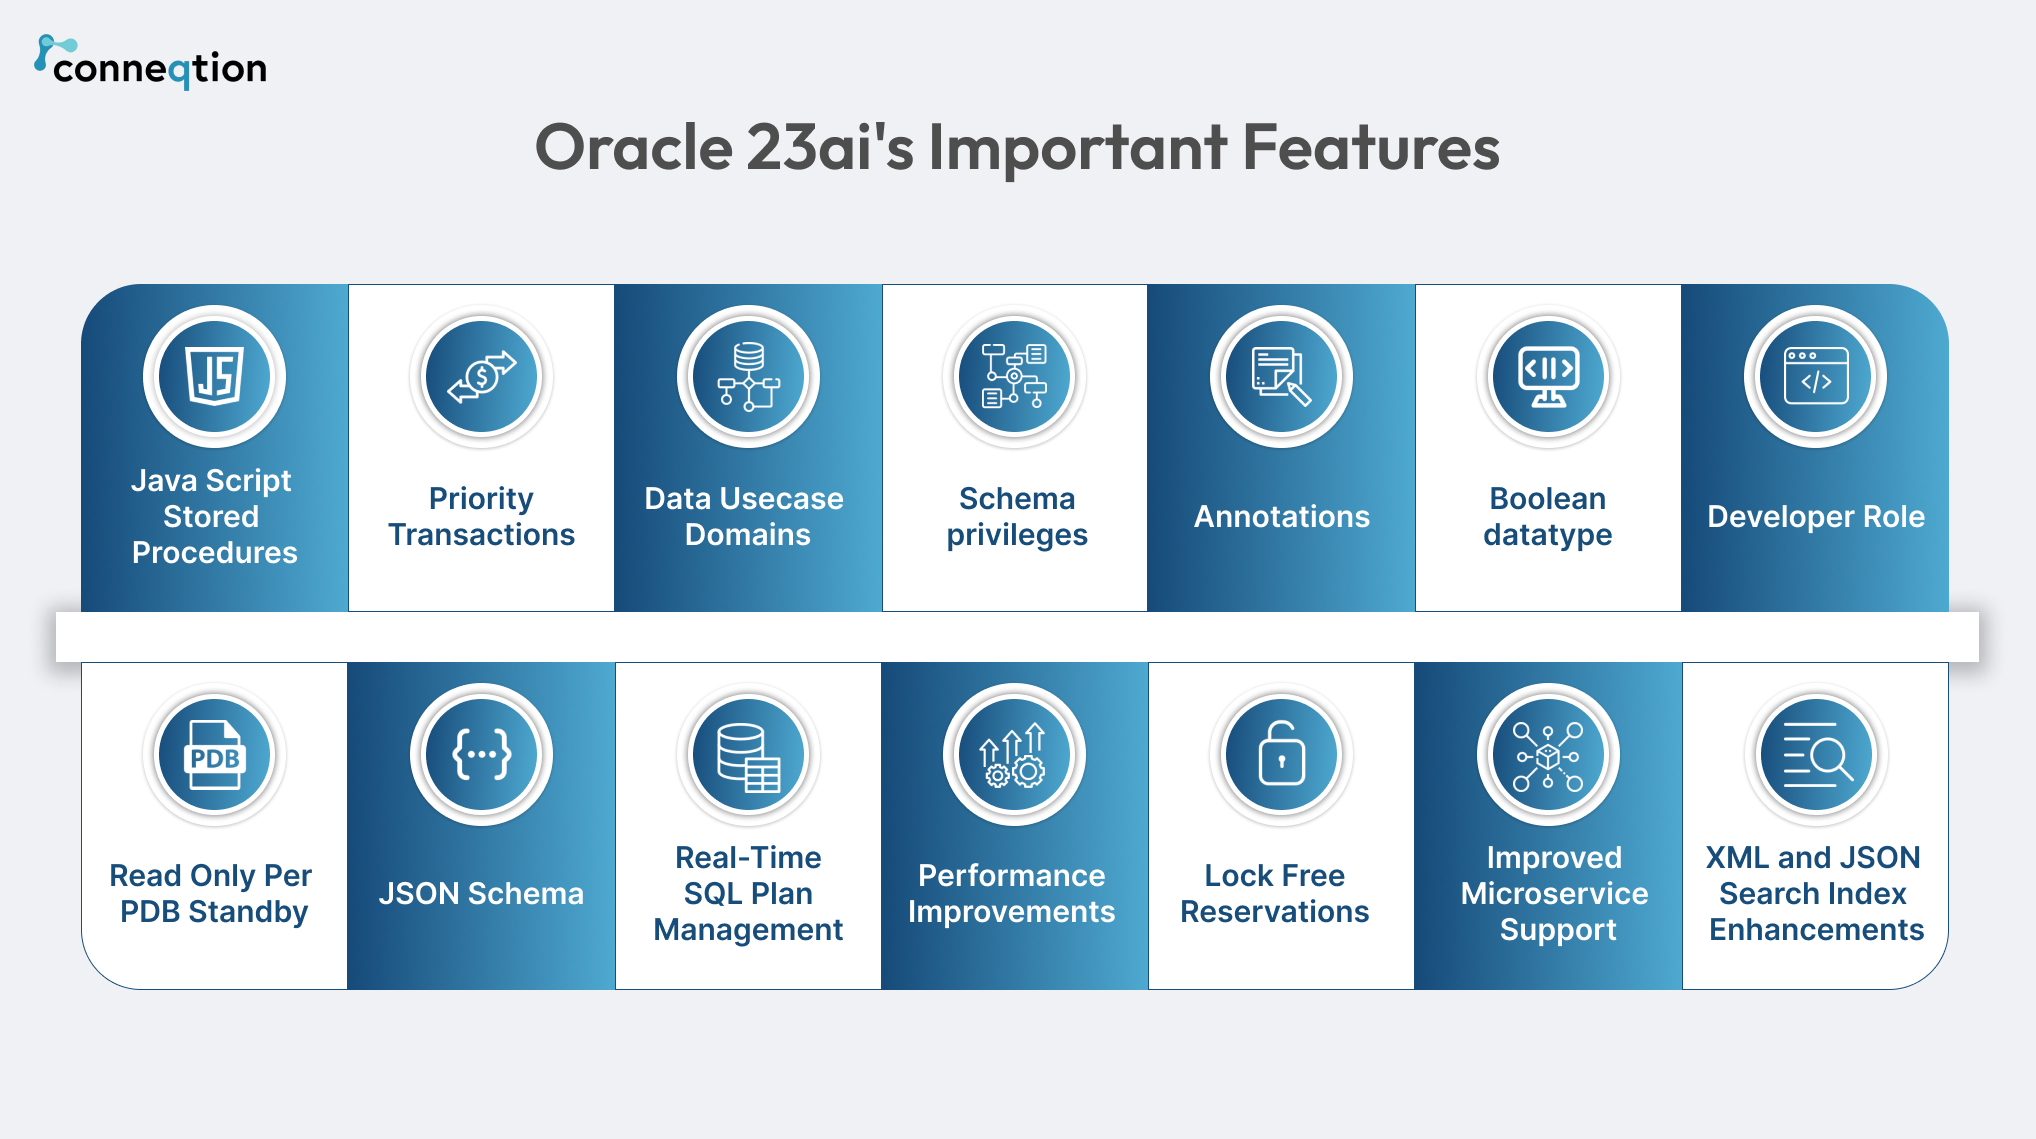 Oracle 23ai's Important Features